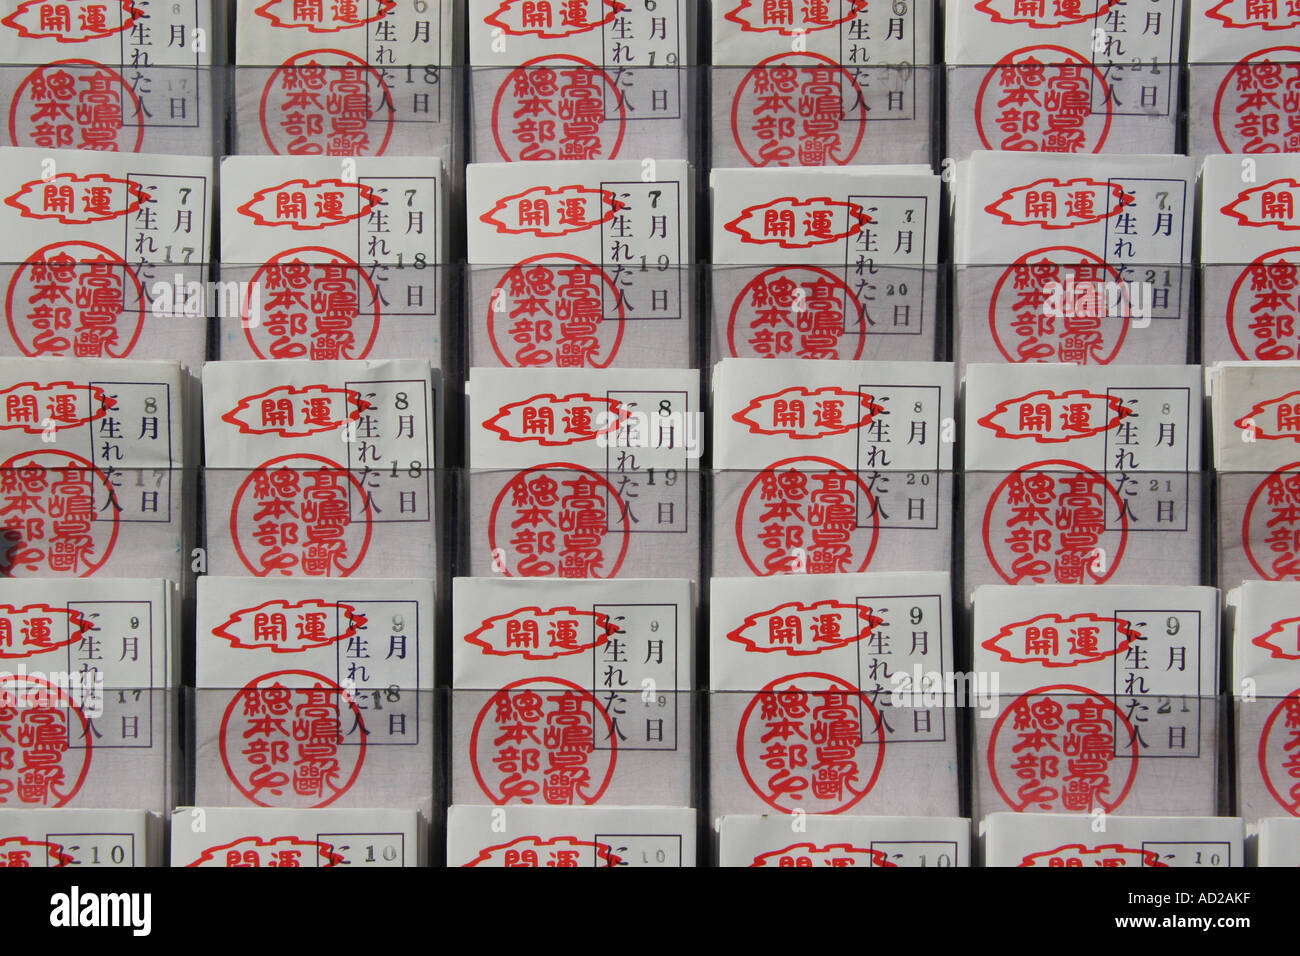 Birthday fortunes at a shinto shrine in Japan Stock Photo